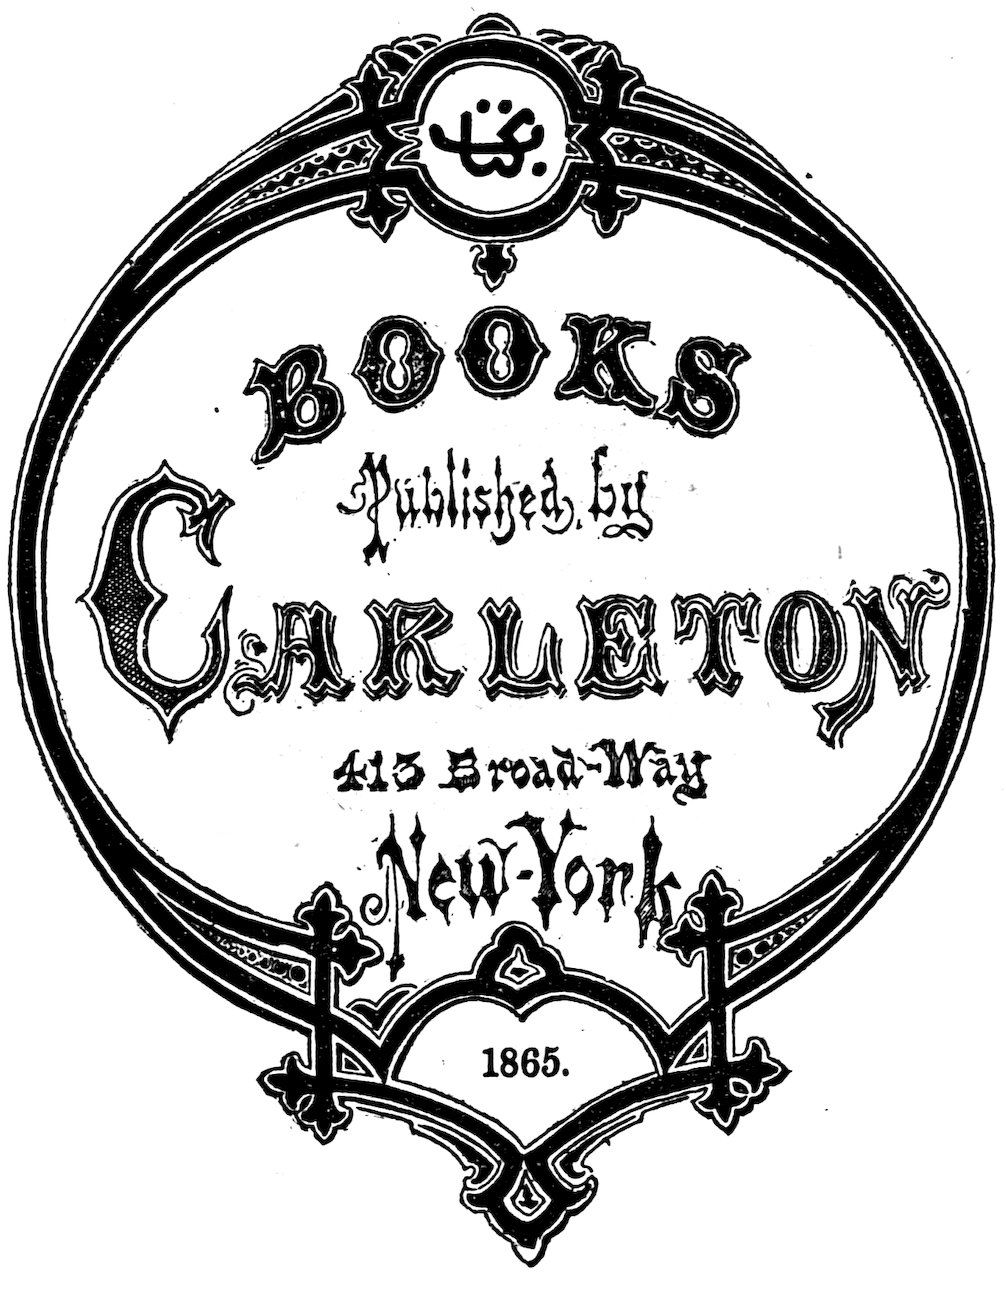 BOOKS Published by CARLETON 413 Broad-Way New York 1865.